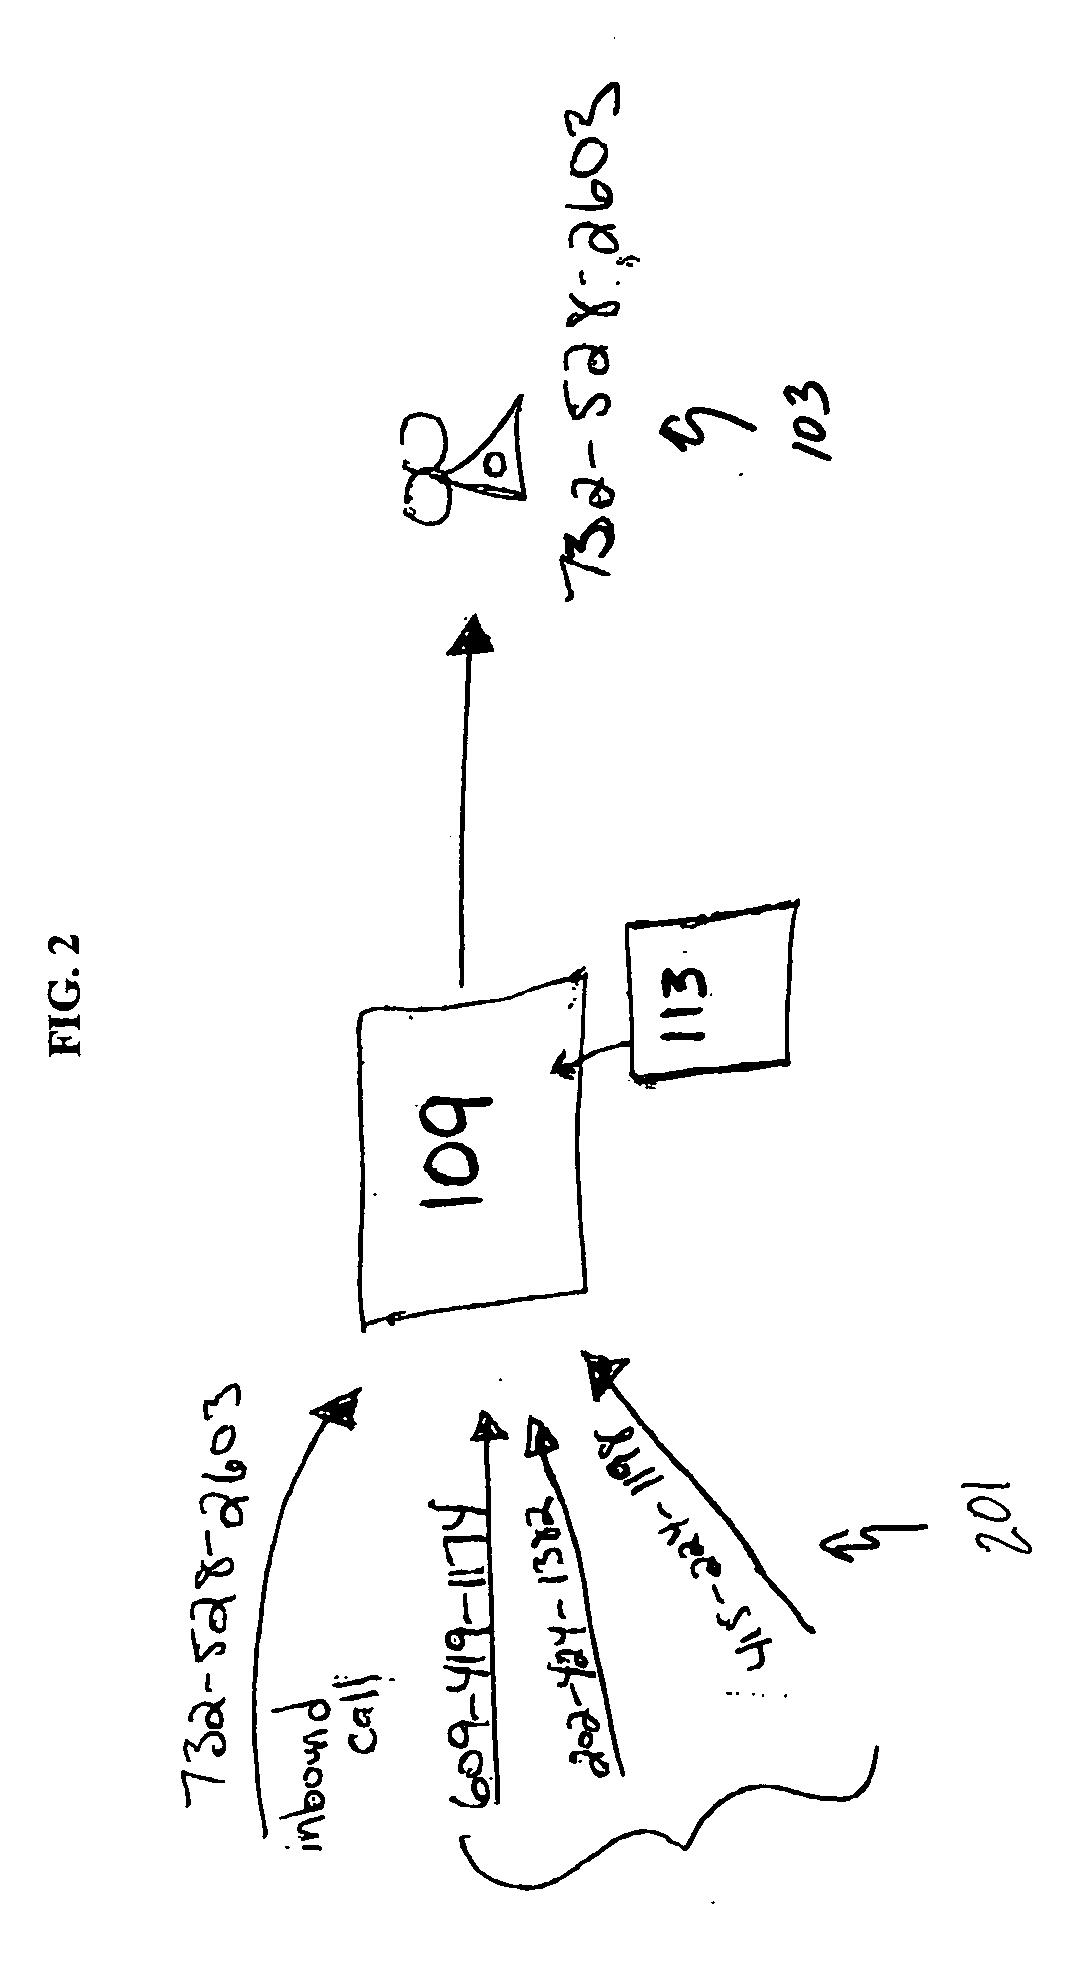 Method and apparatus for placing a long distance call based on a virtual phone number